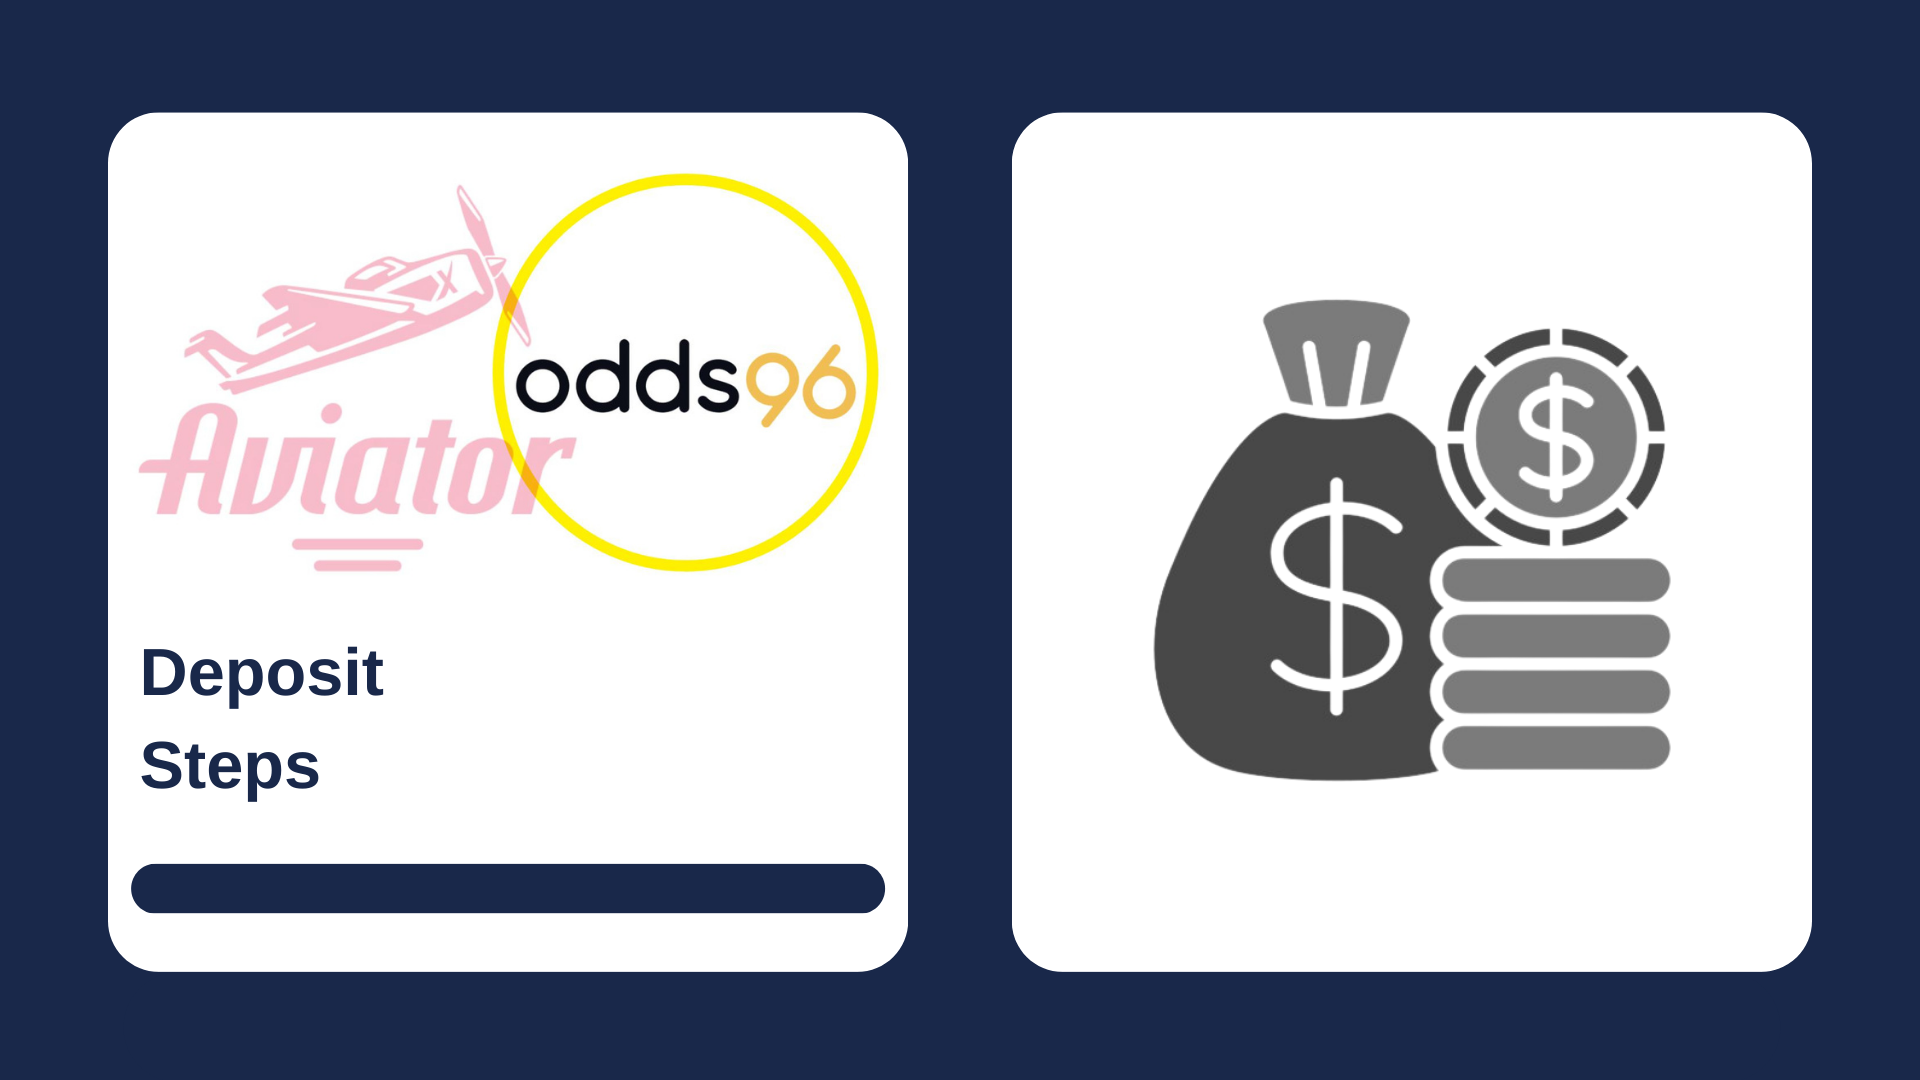 First picture showing Aviator and Odds96 logos with text, and second - deposit money icon